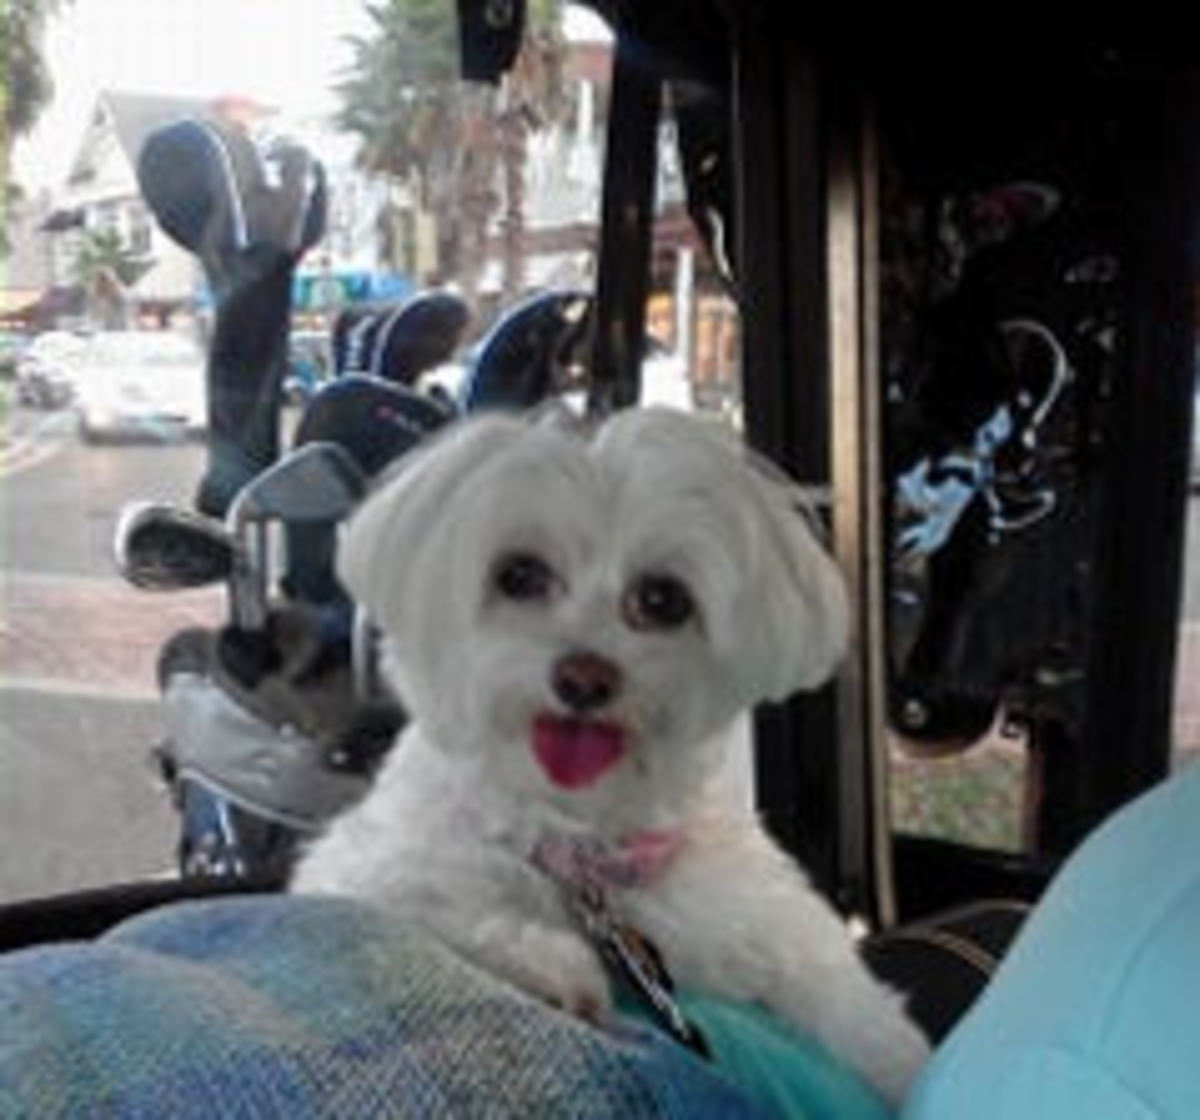 She loved her doggy car seat, but she really loved traveling in the basket of the golf cart.